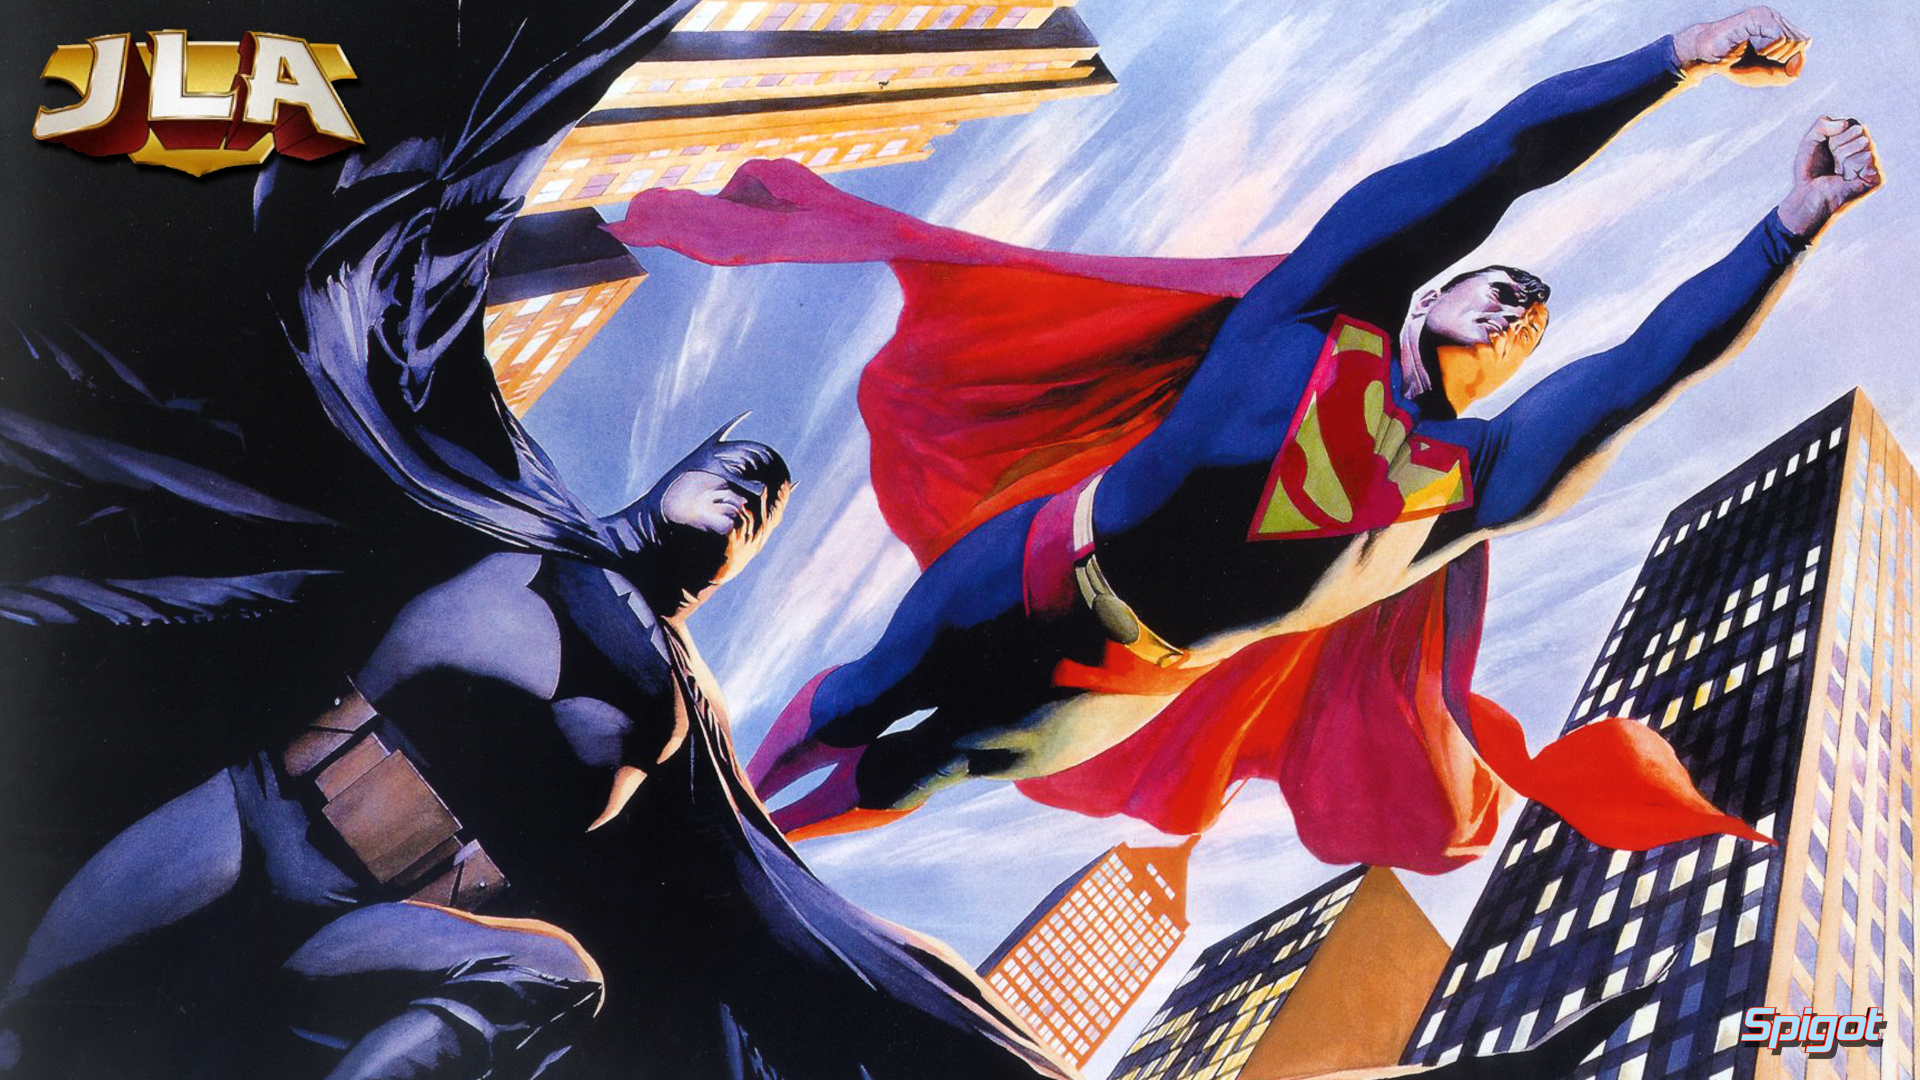 Yes More Justice League Wallpaper From Art By Alex Ross